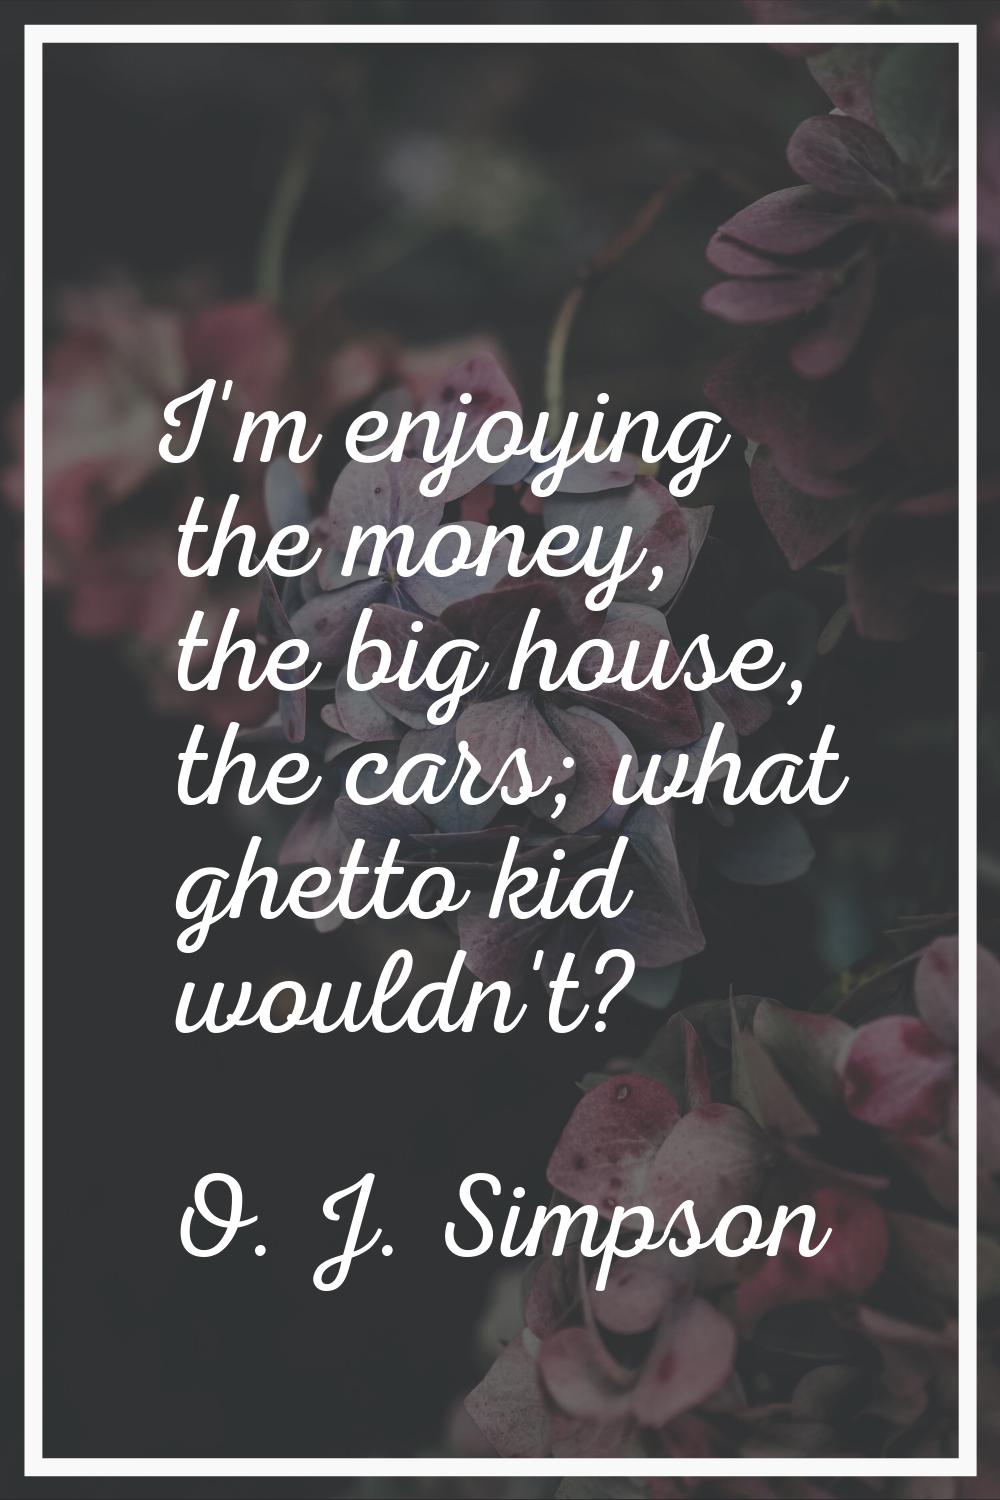 I'm enjoying the money, the big house, the cars; what ghetto kid wouldn't?